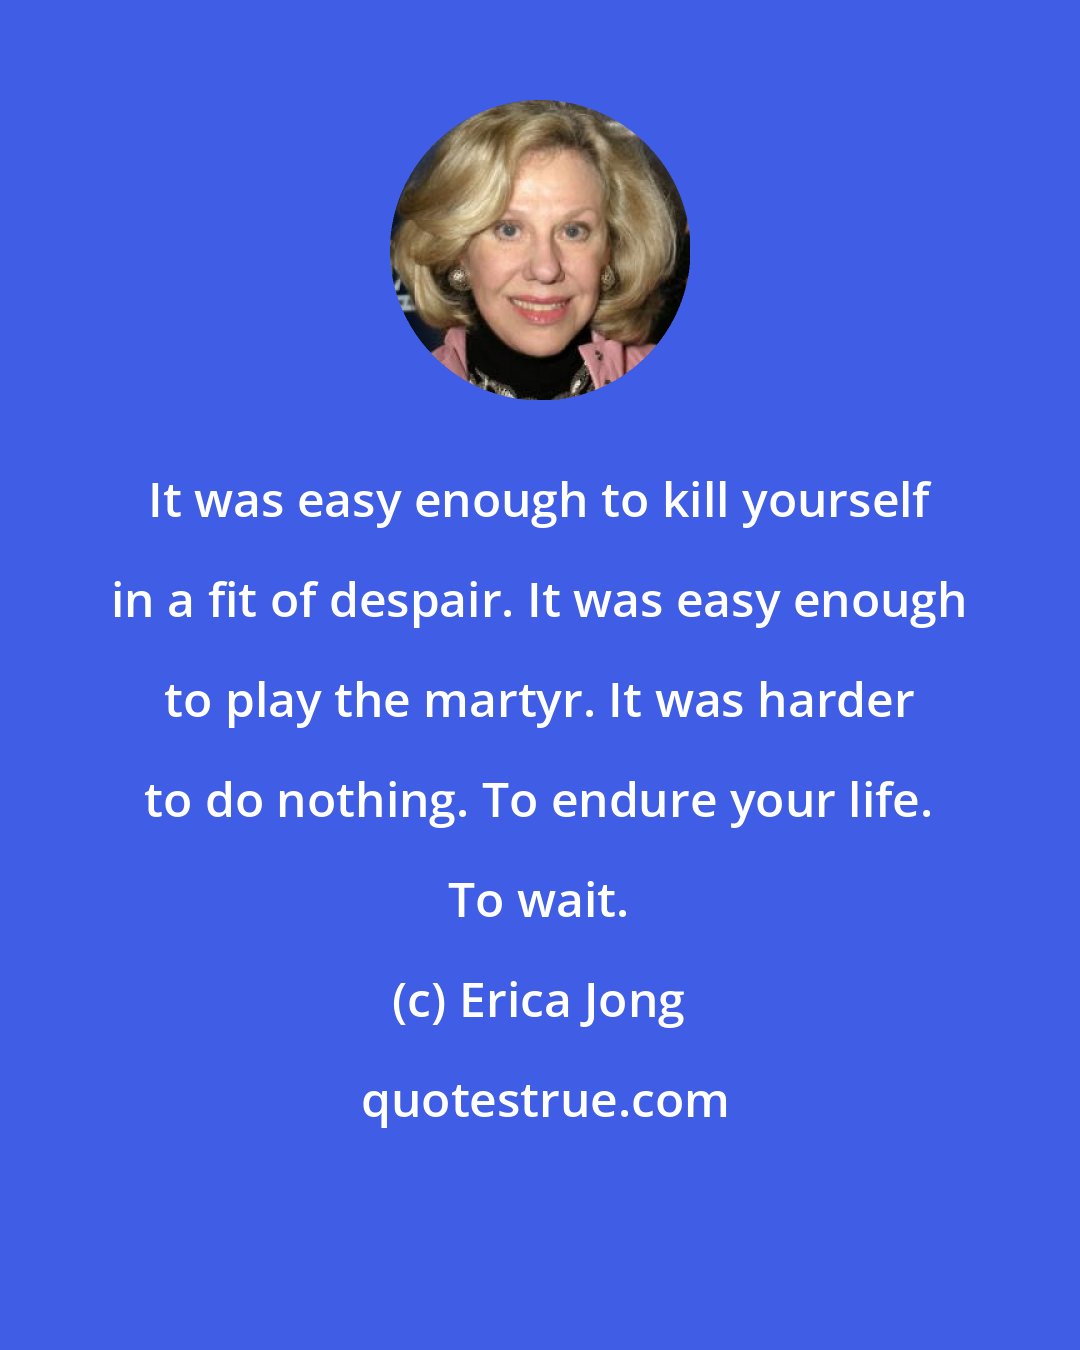 Erica Jong: It was easy enough to kill yourself in a fit of despair. It was easy enough to play the martyr. It was harder to do nothing. To endure your life. To wait.